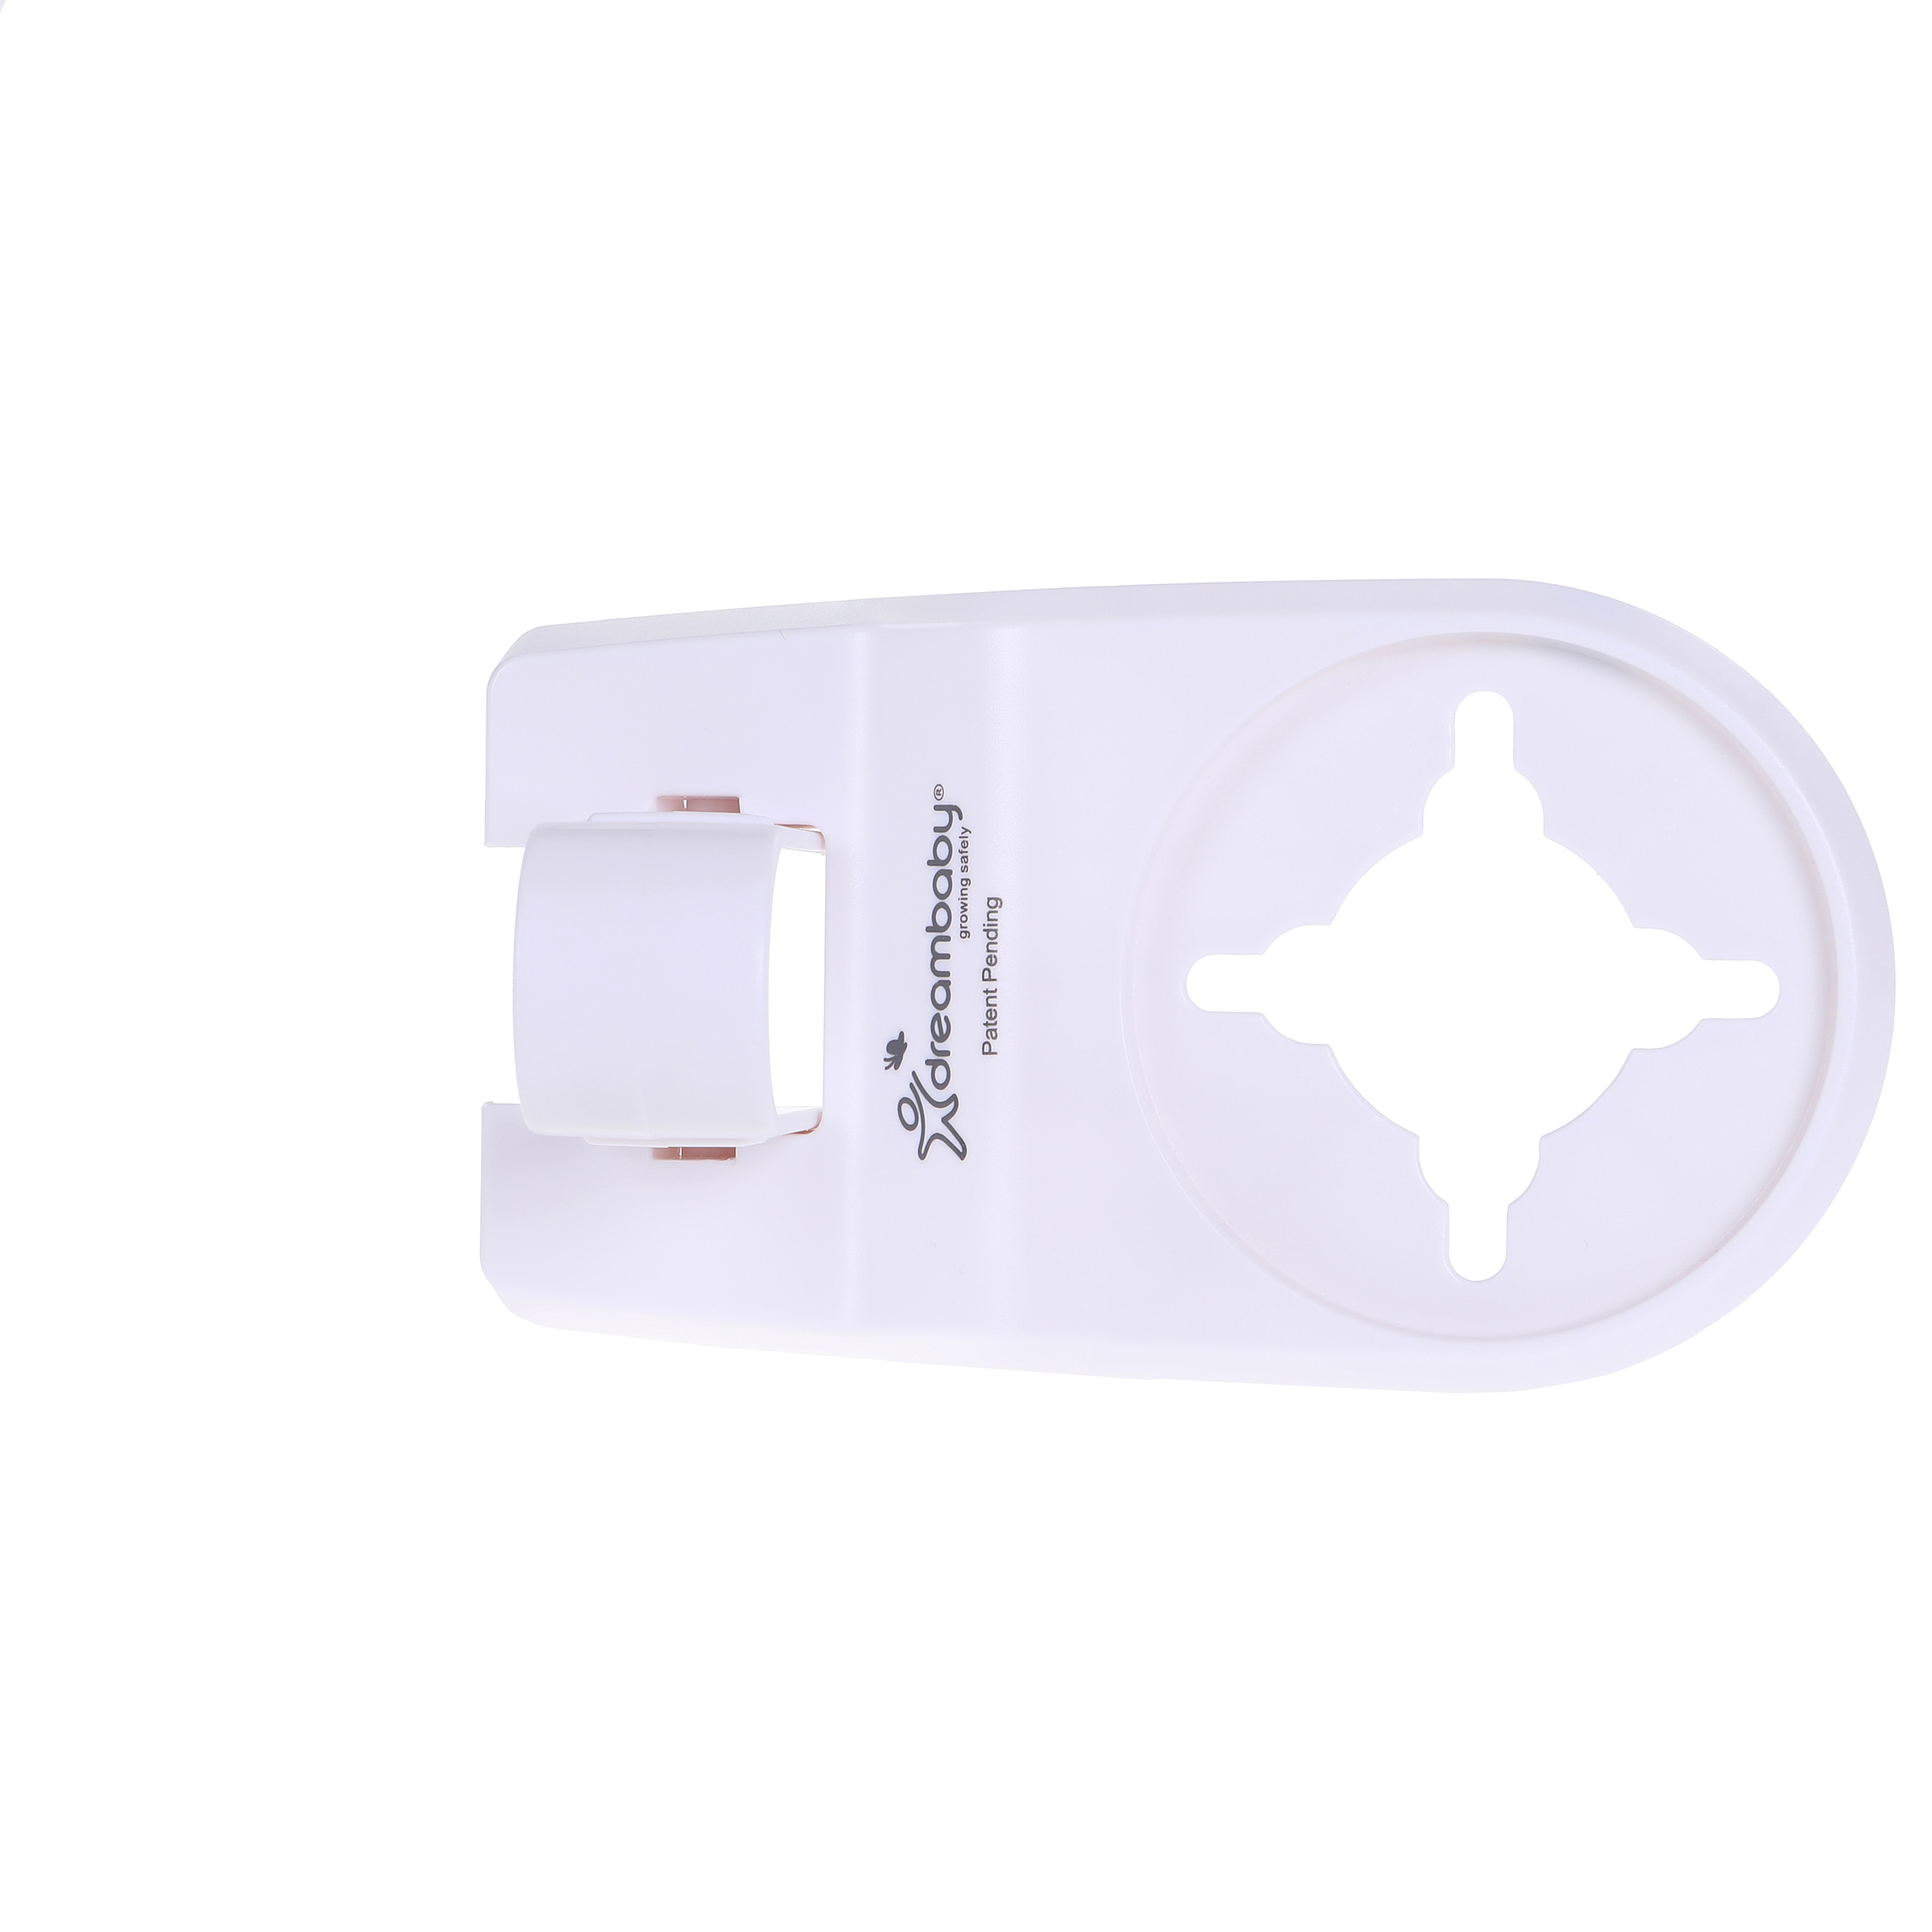 Dreambaby Child Safety Lever Door Lock - White Plastic, Fits Most